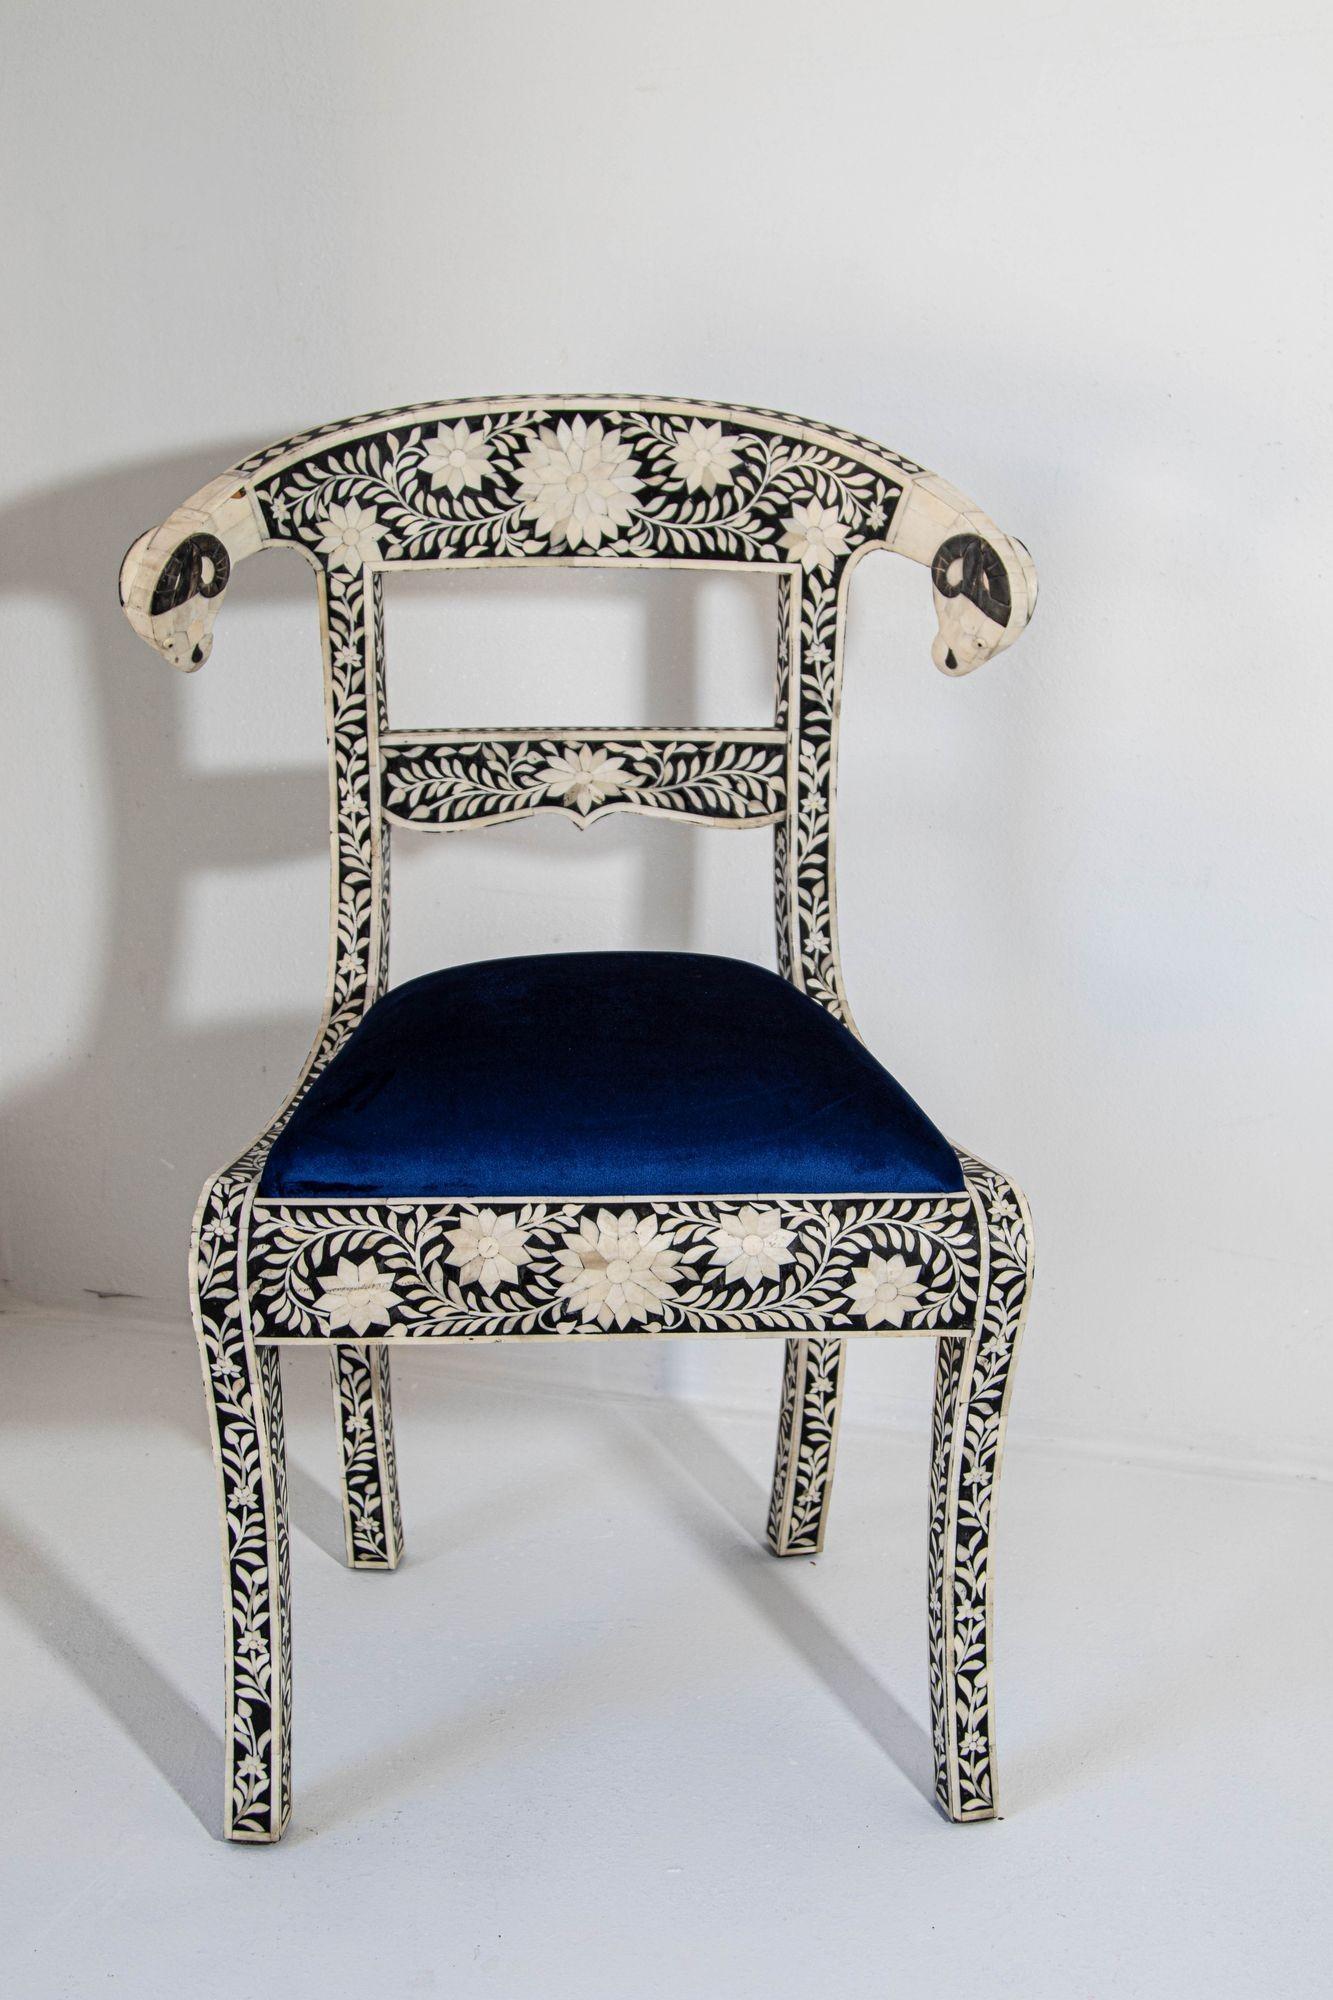 20th Century Antique Anglo-Indian Side Chairs with Ram's Head Bone Inlay Royal Blue Seat Pair For Sale